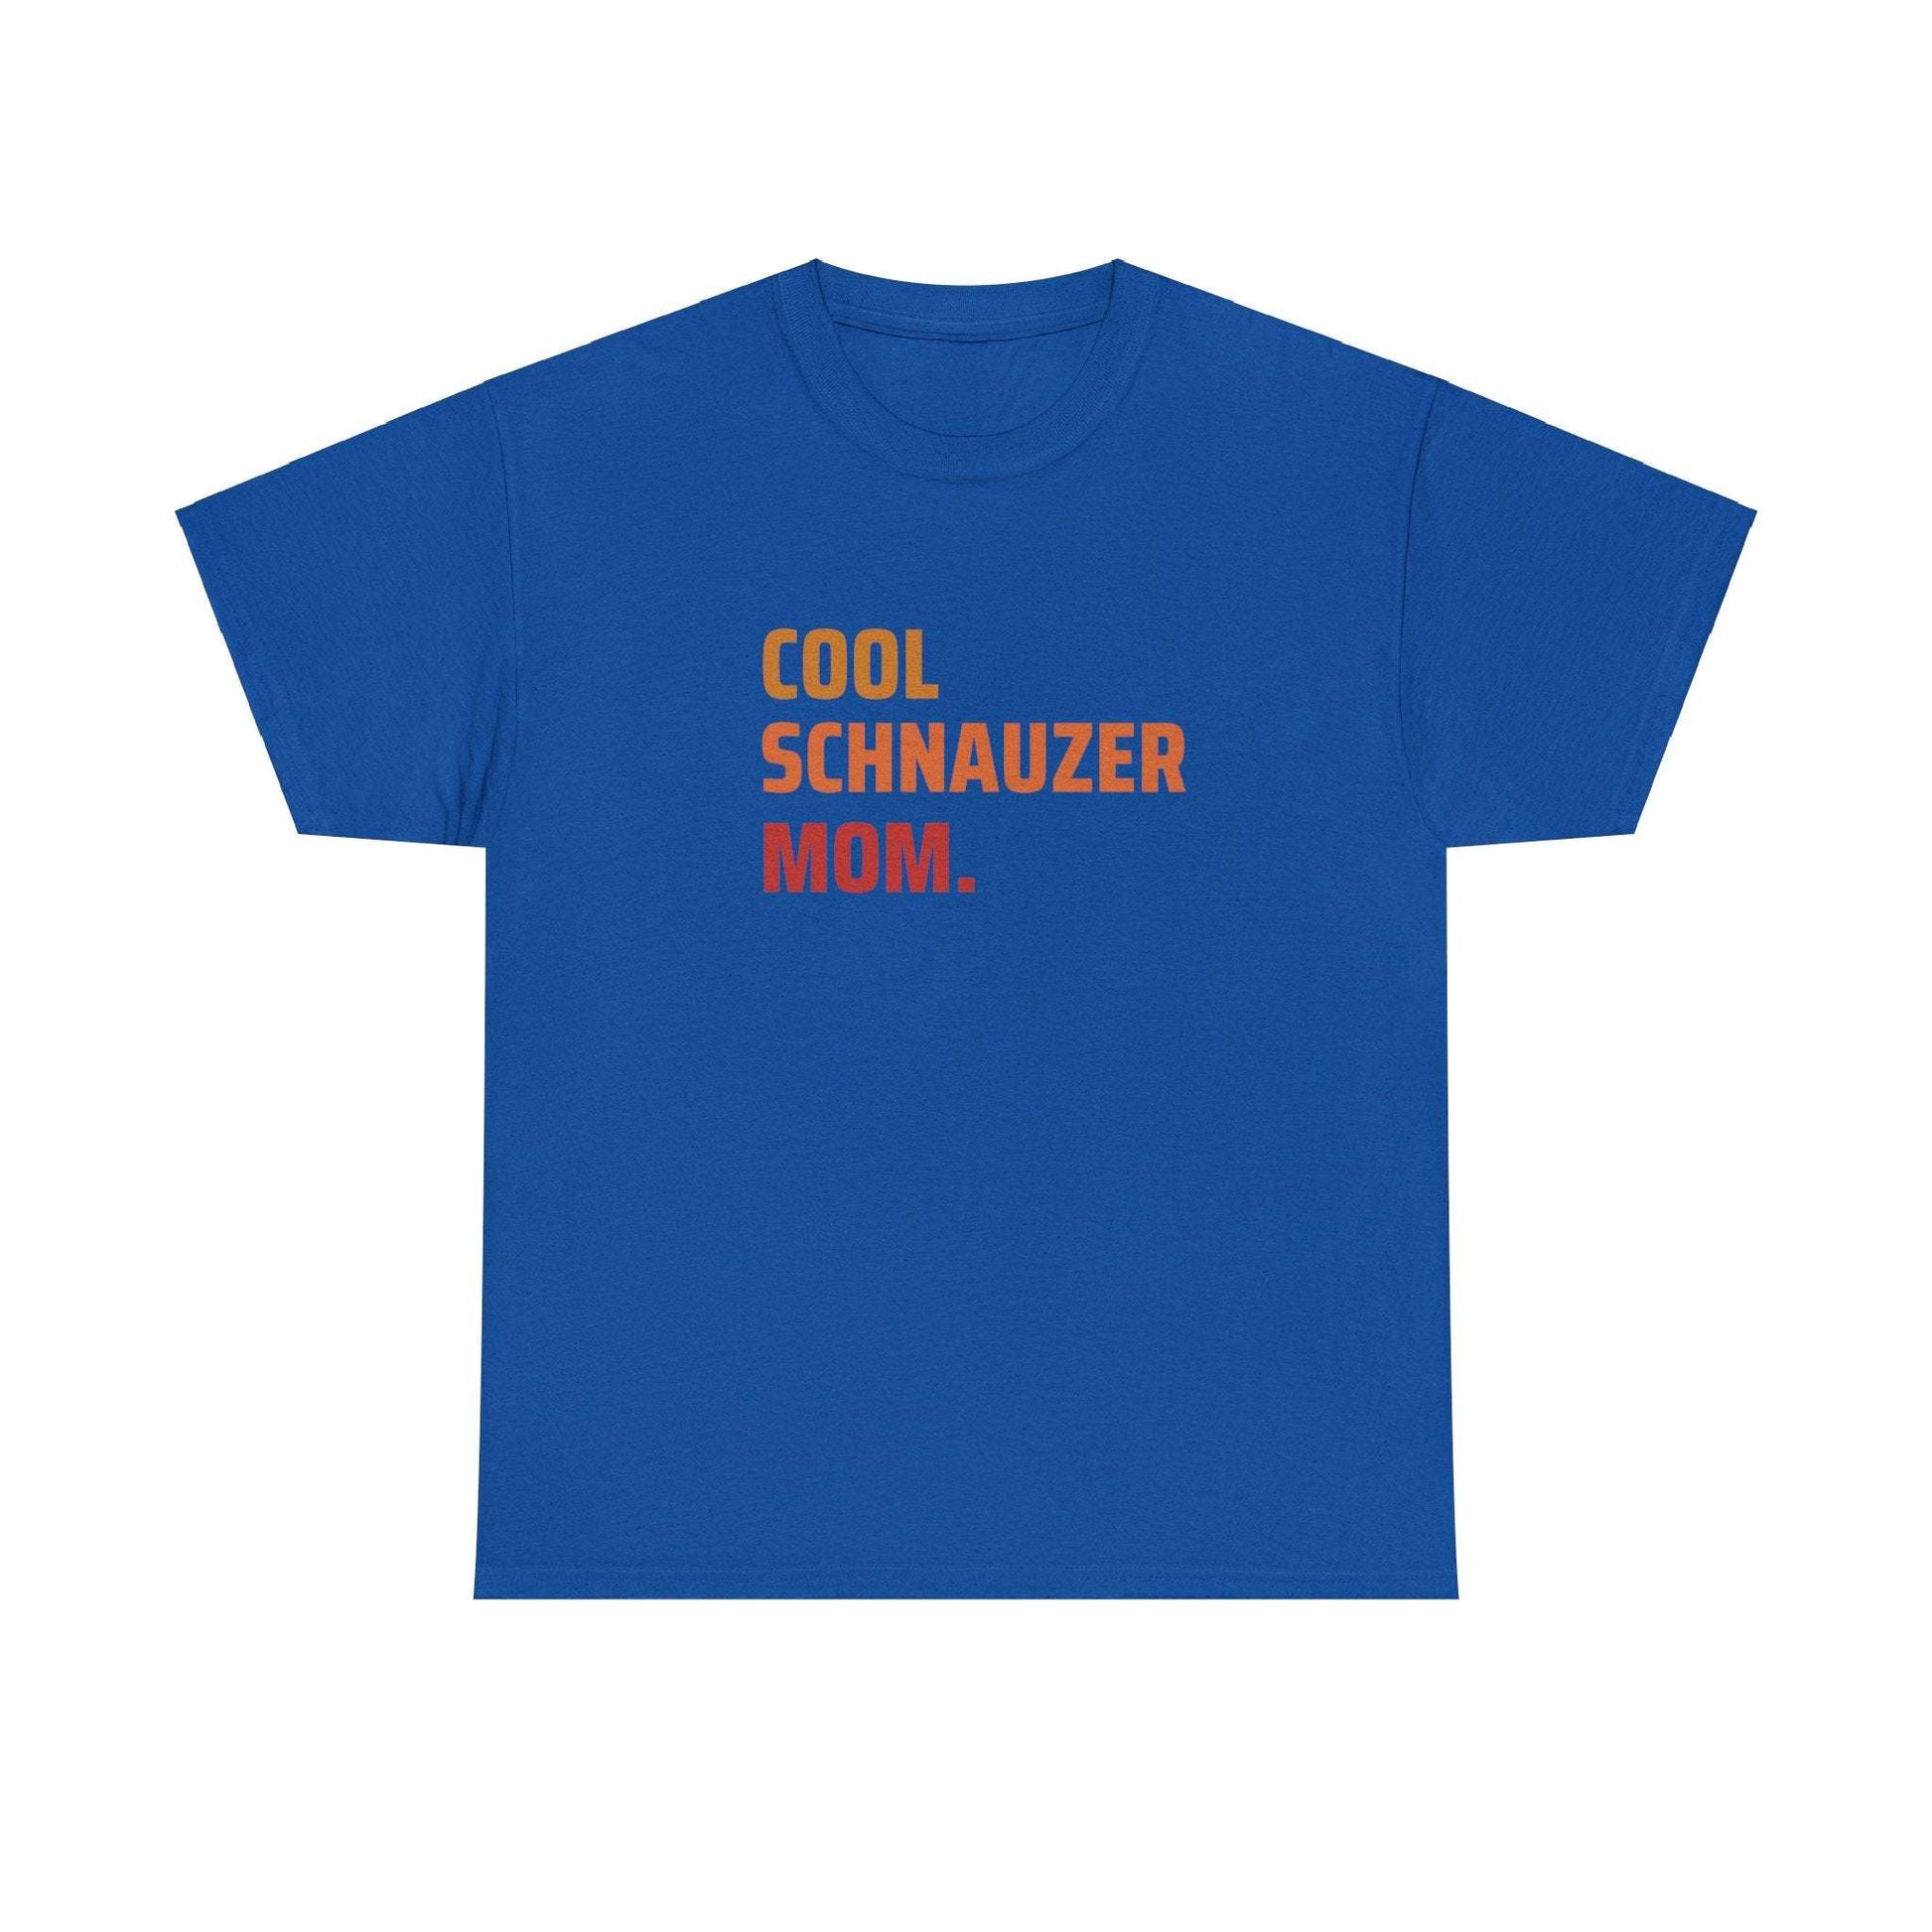 Fabulous Tee Shirts' 'Cool Schnauzer Mom' royal blue t-shirt displayed to emphasize its unique design and premium quality.